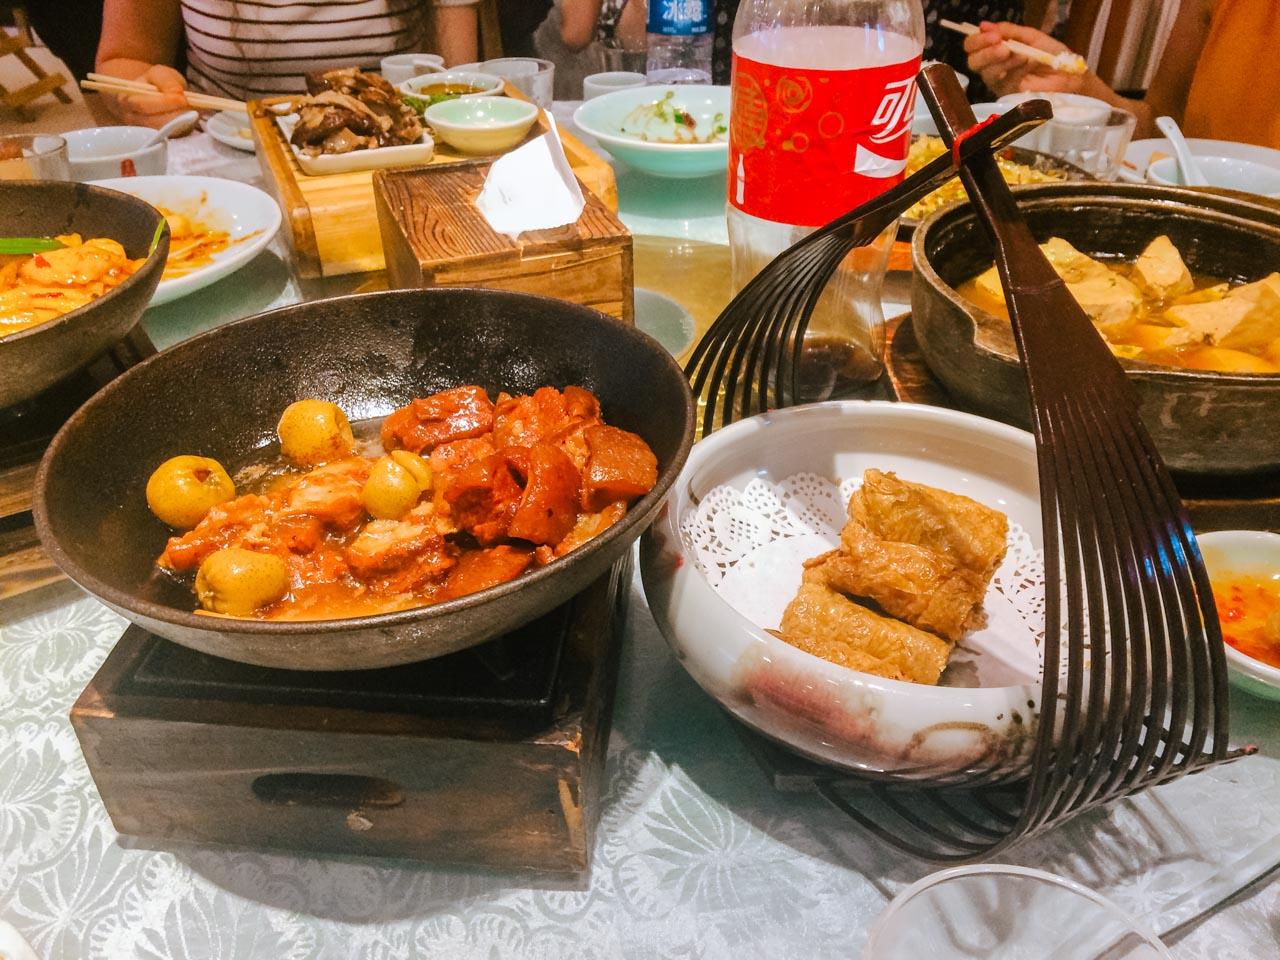 Various Chinese dishes on a Lazy Susan rotating table at a restaurant in Beijing, China